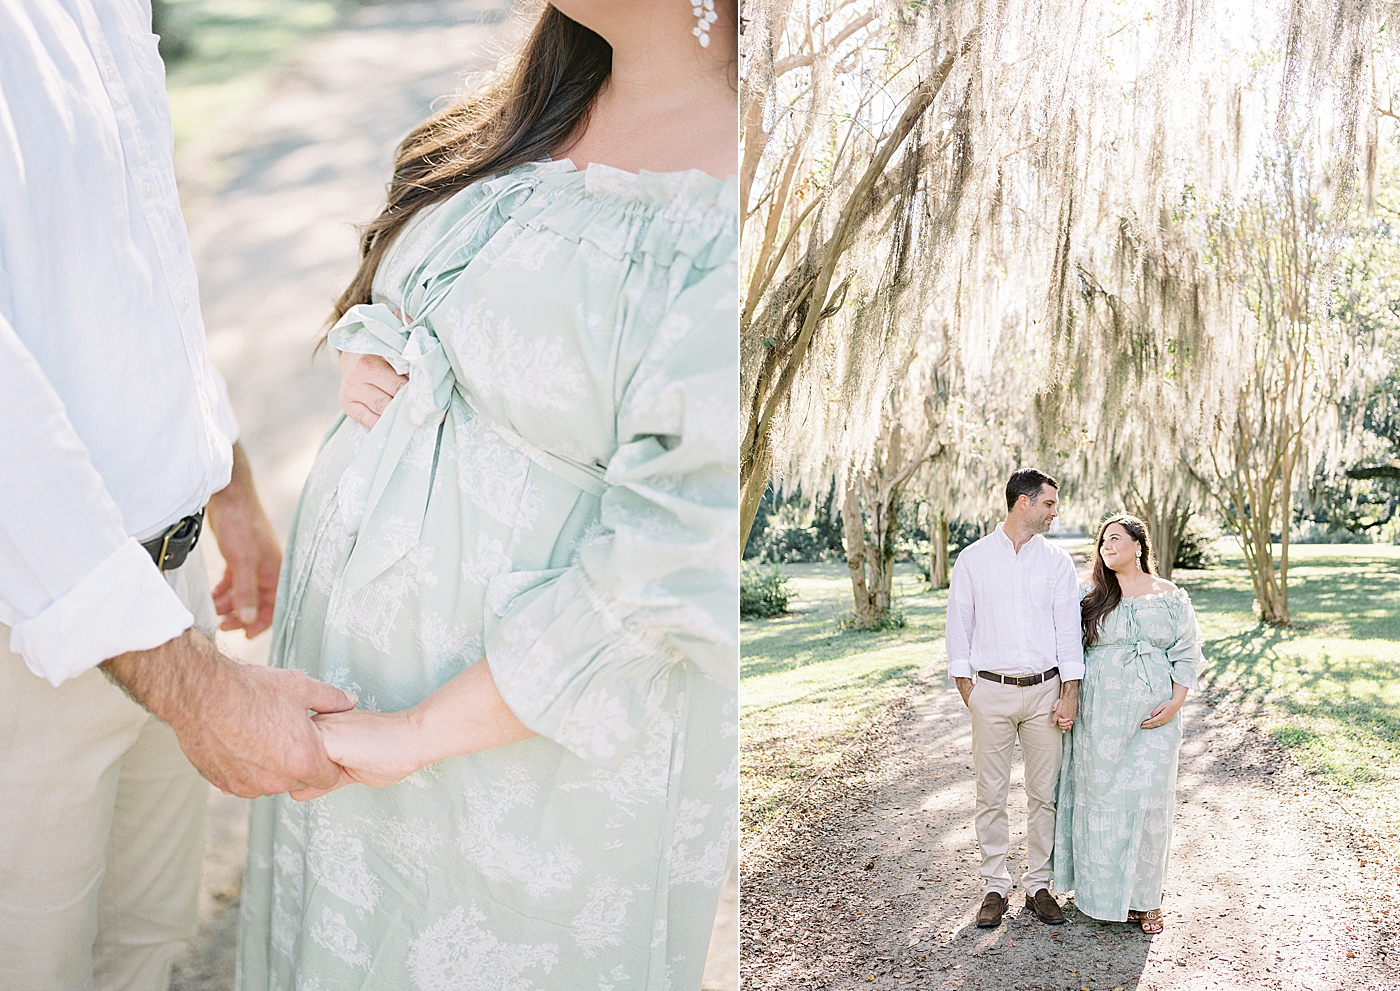 Side-by-side images of expecting mother and husband in a green off-the-shoulder spring dress walking and looking at each other smiling, holding her pregnant belly on a tree-lined path | Image by Caitlyn Motycka 